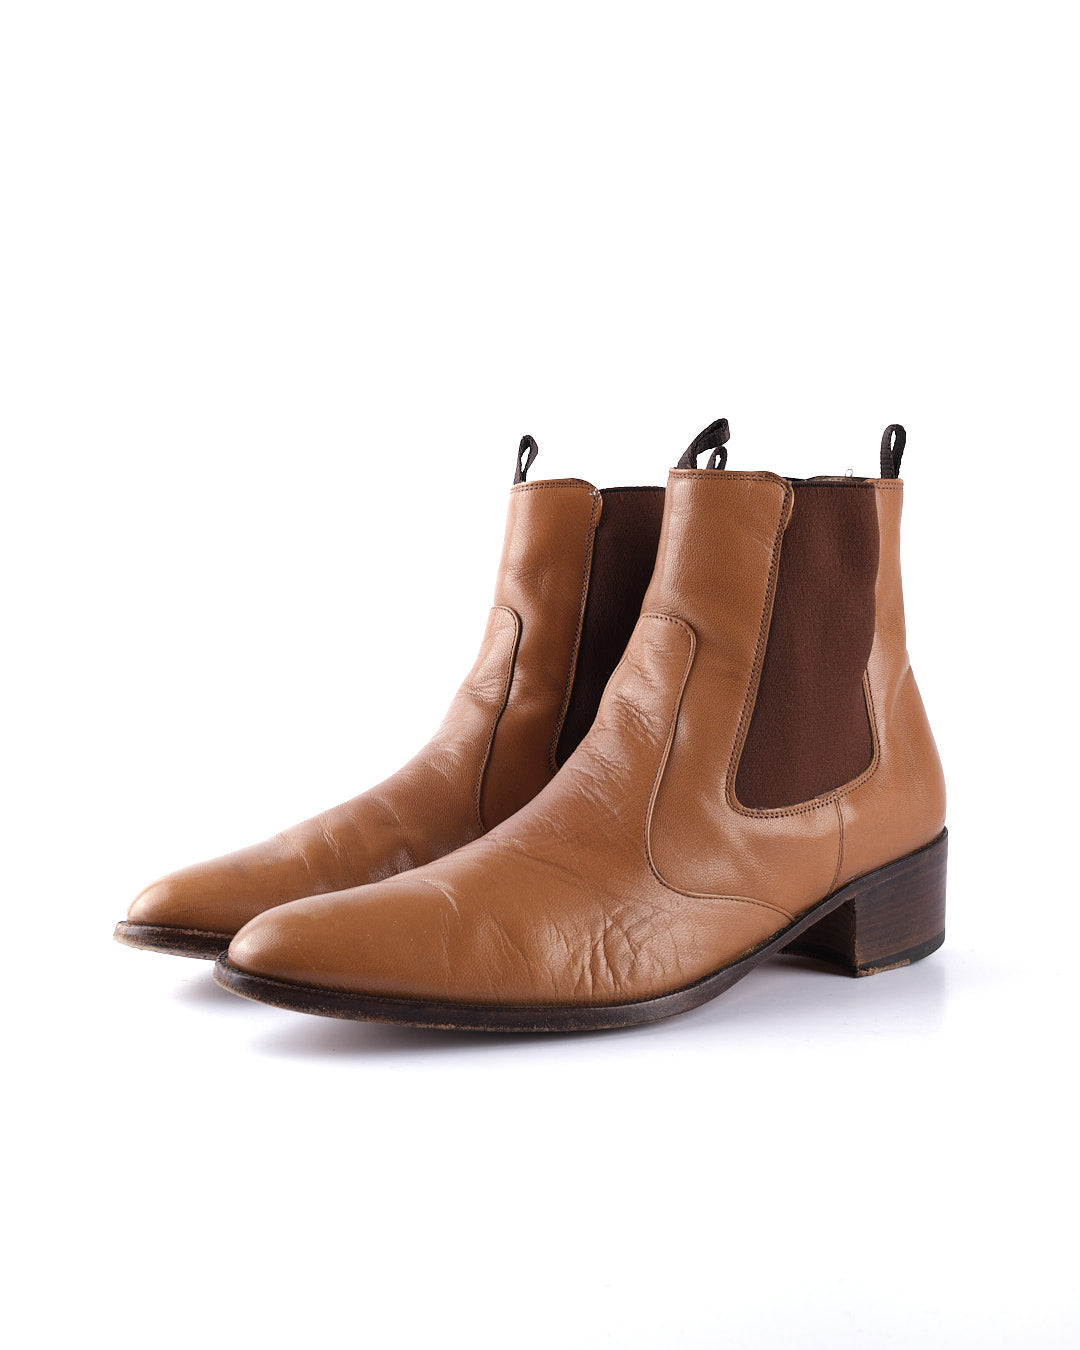 Helmut Lang 2000's Cuban Heel Boot in Saddle Brown Leather